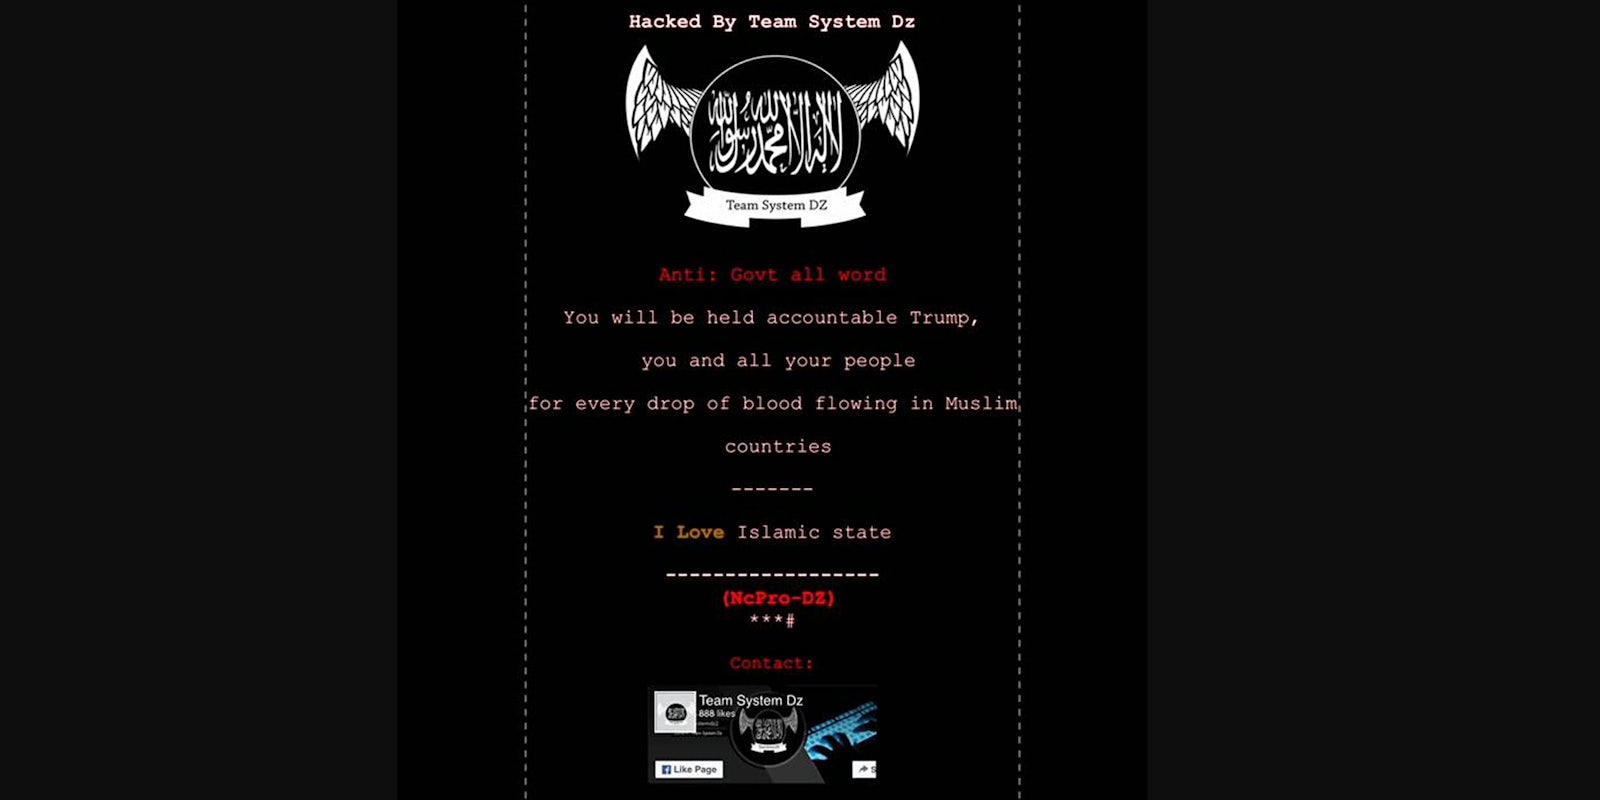 Websites in New York, Ohio and Maryland were hacked with a pro-ISIS message.